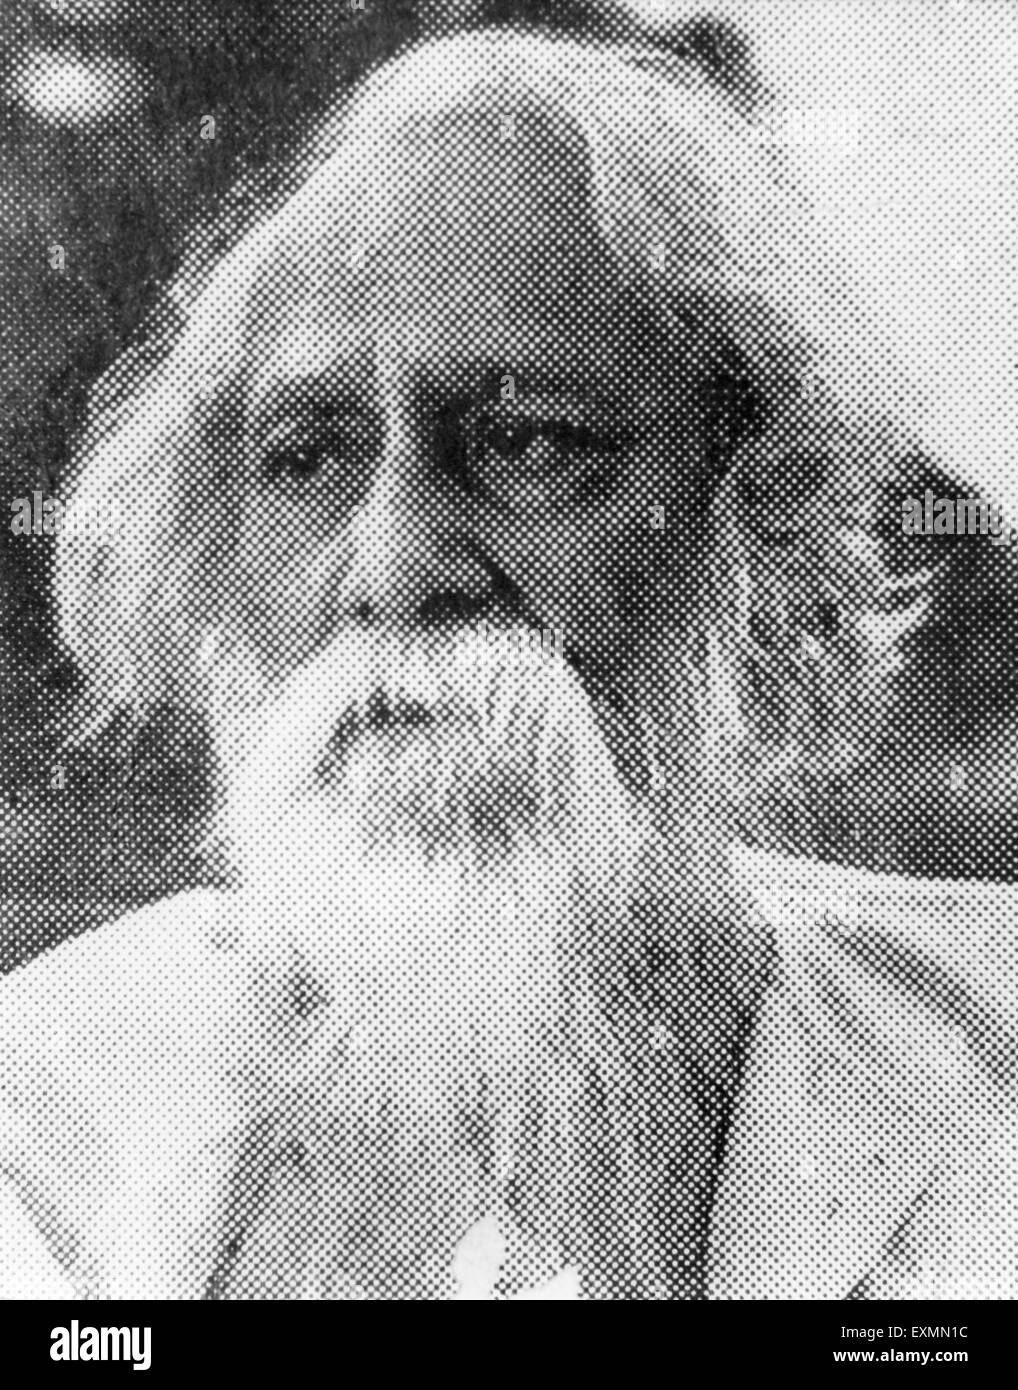 Rabindranath Tagore, Bengali poet, writer, composer, philosopher, social reformer, painter, 1940, India, Asia, old vintage 1900s picture Stock Photo